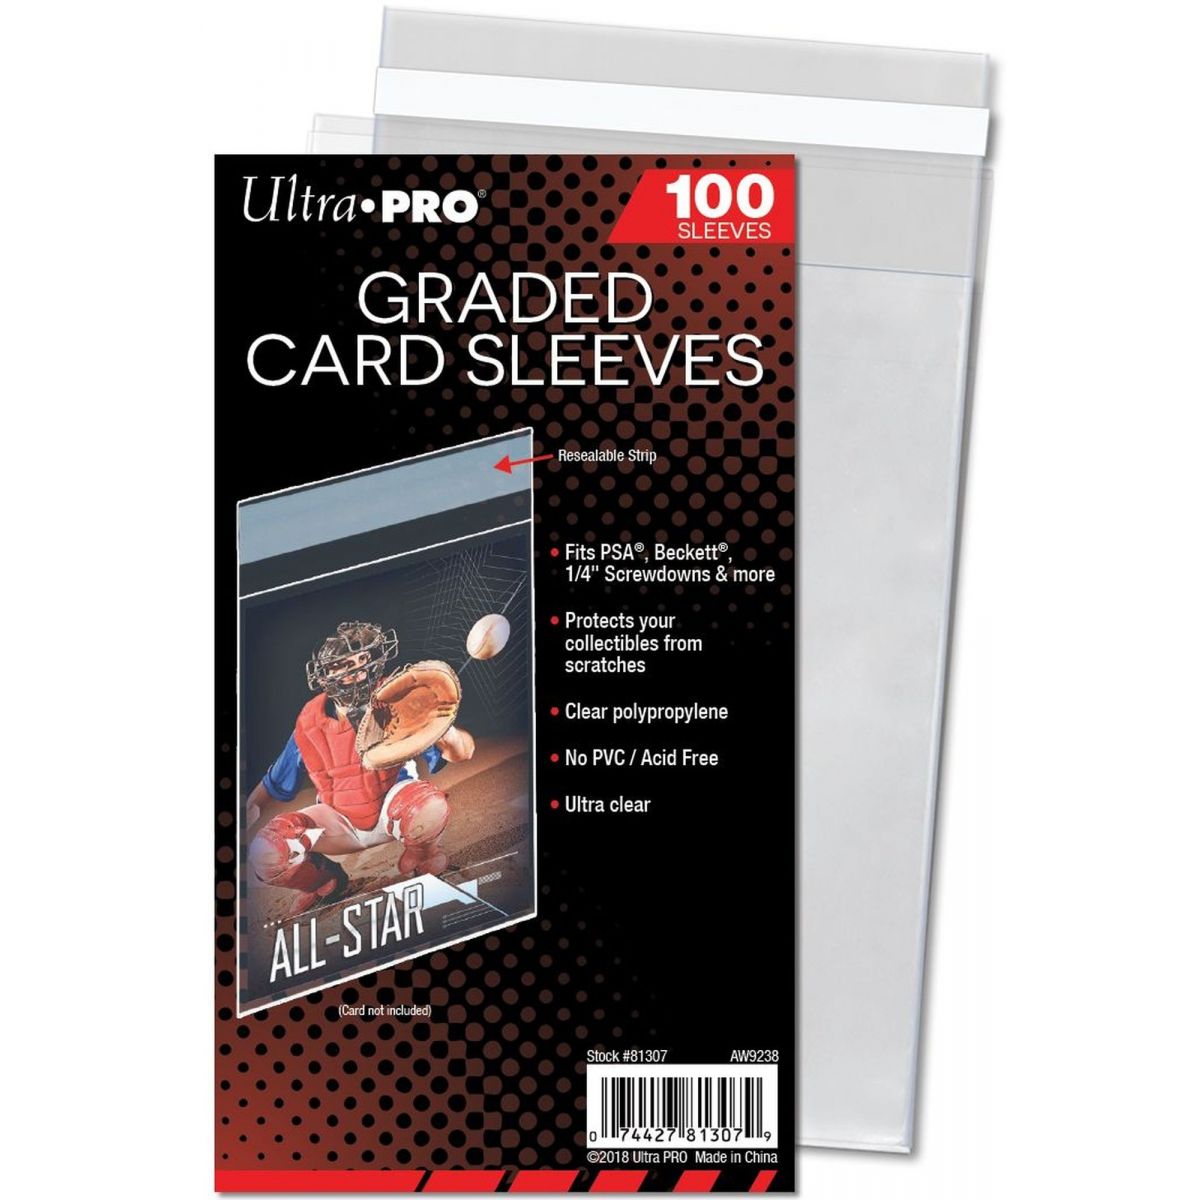 Ultra Pro - Team Bags - Graded Card Sleeves Resealable - Protège-cartes Gradées Refermables (100)